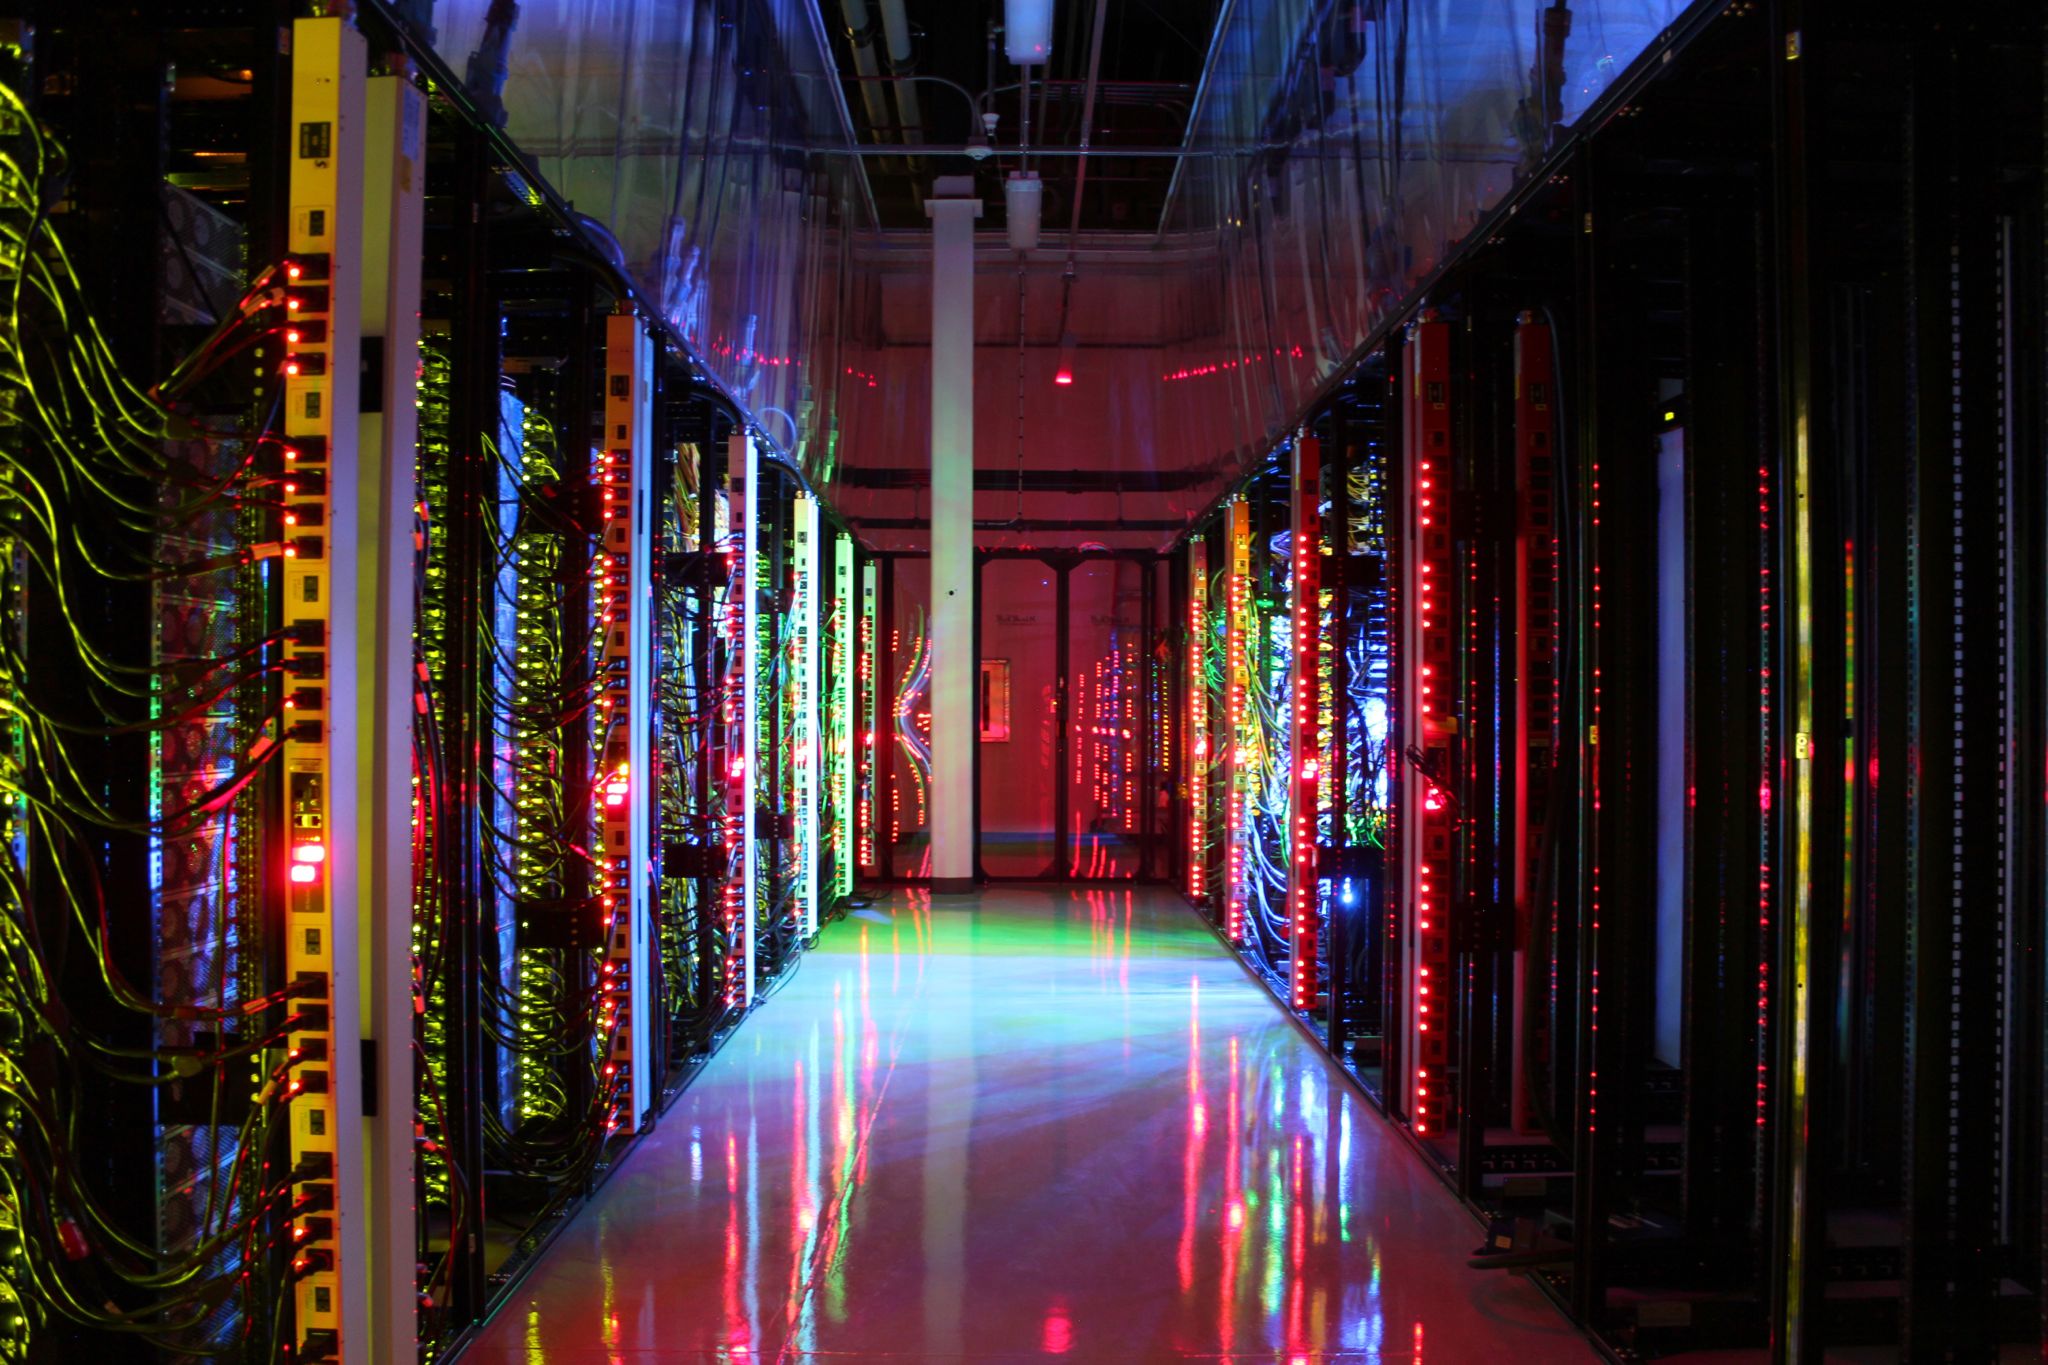 This is the Center for High Performance Computing's area in the University of Utah's Downtown Data Center. Photo by Sam Liston